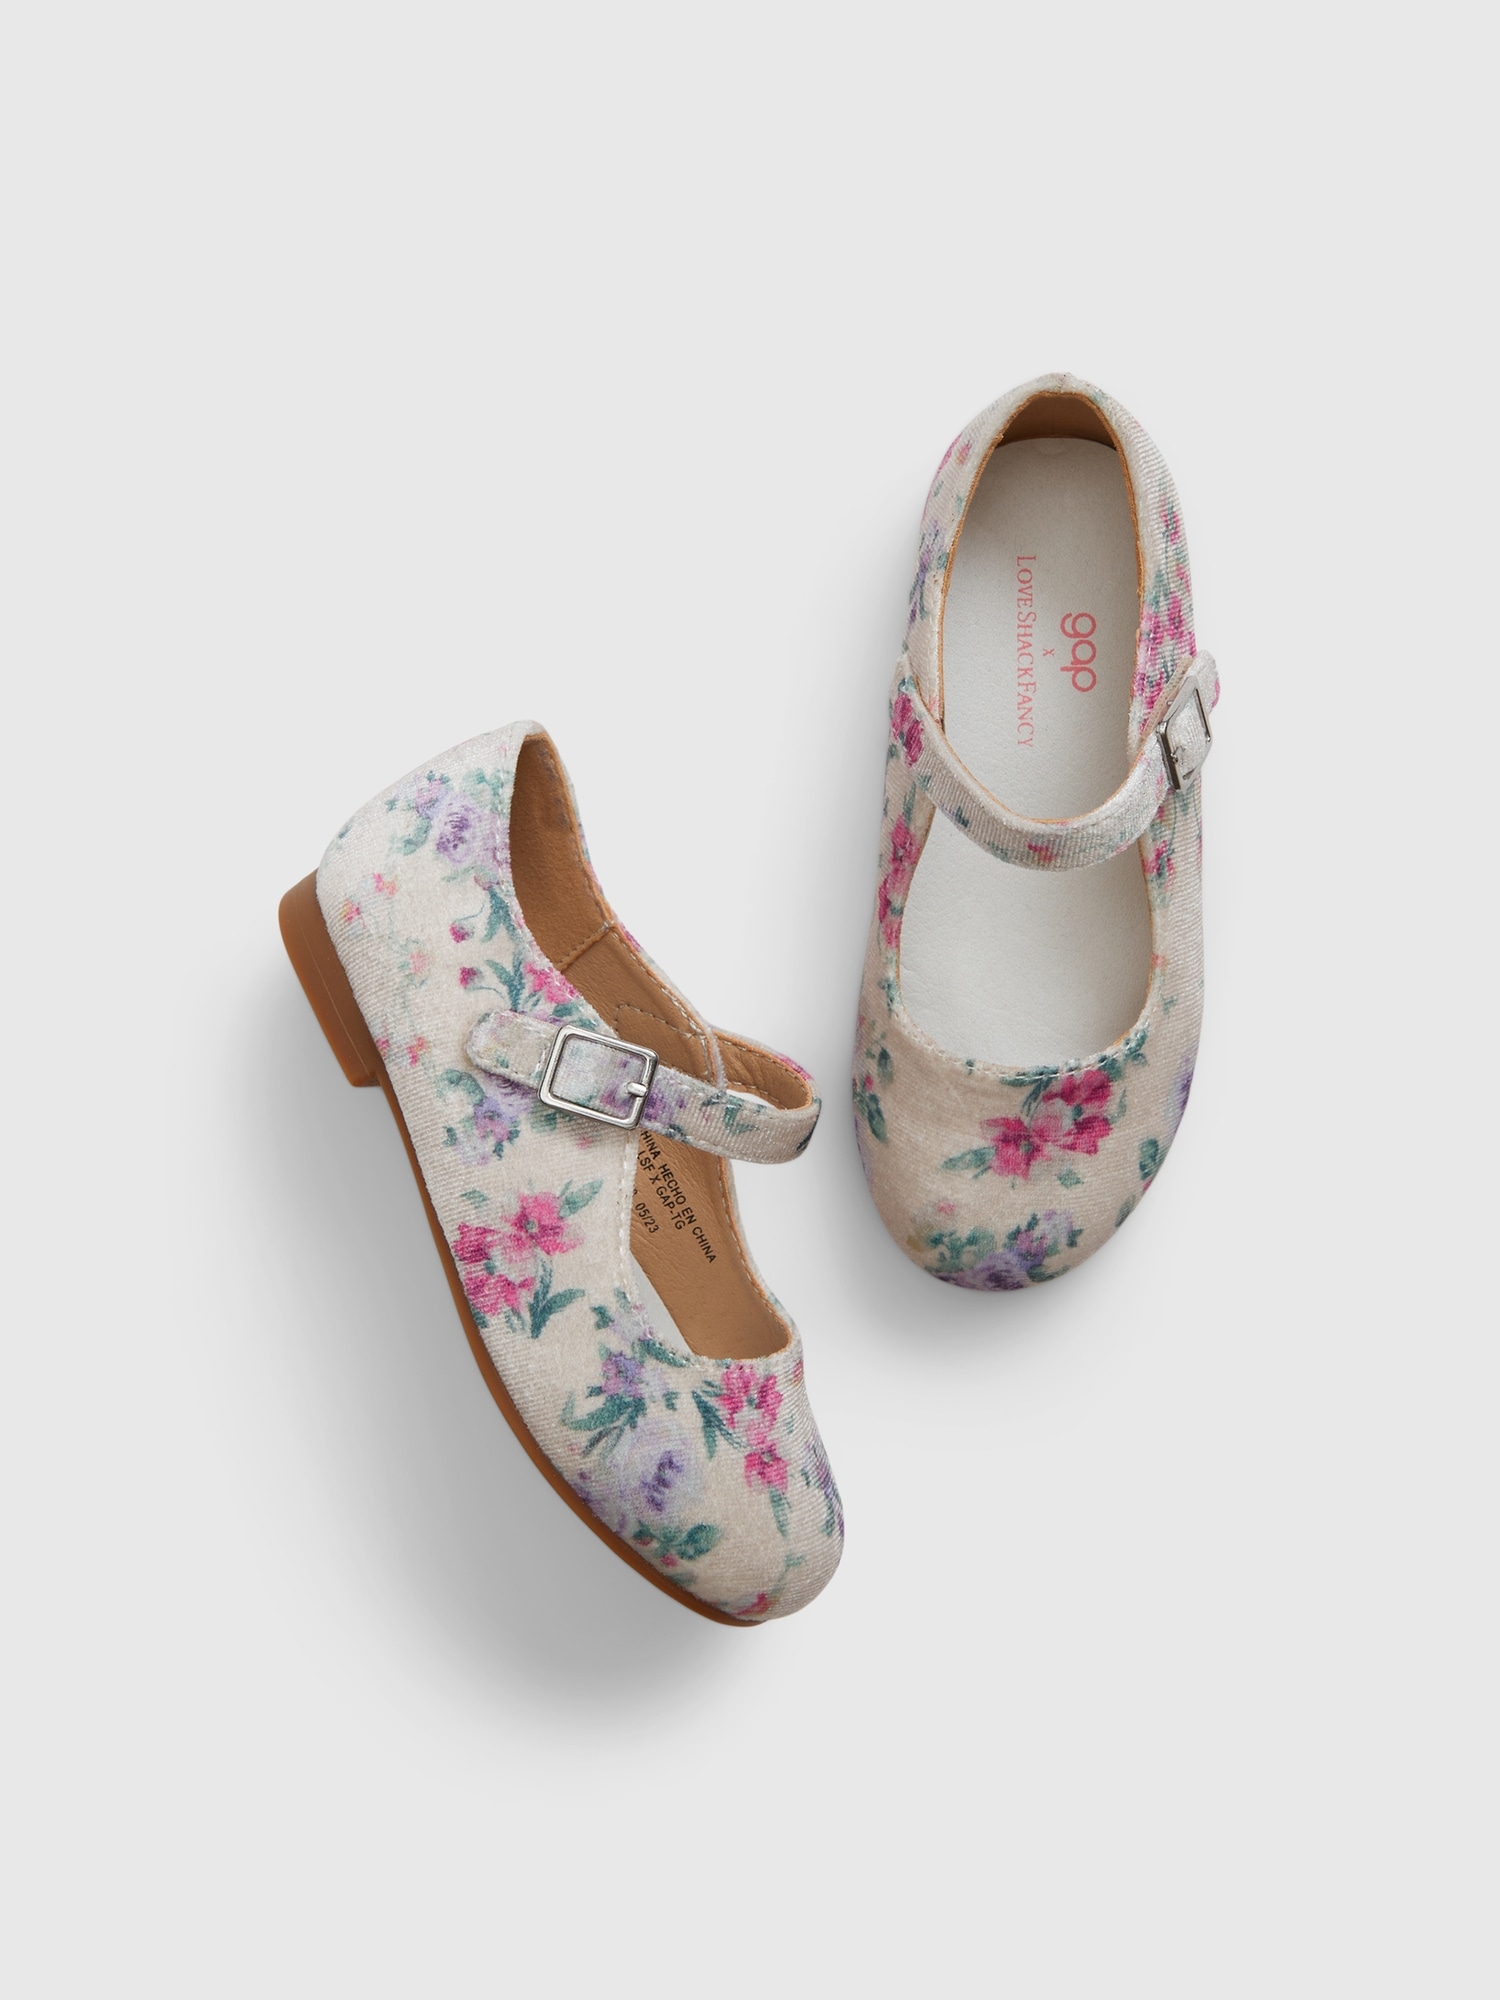 Gap × LoveShackFancy Toddler Floral Mary Jane Shoes